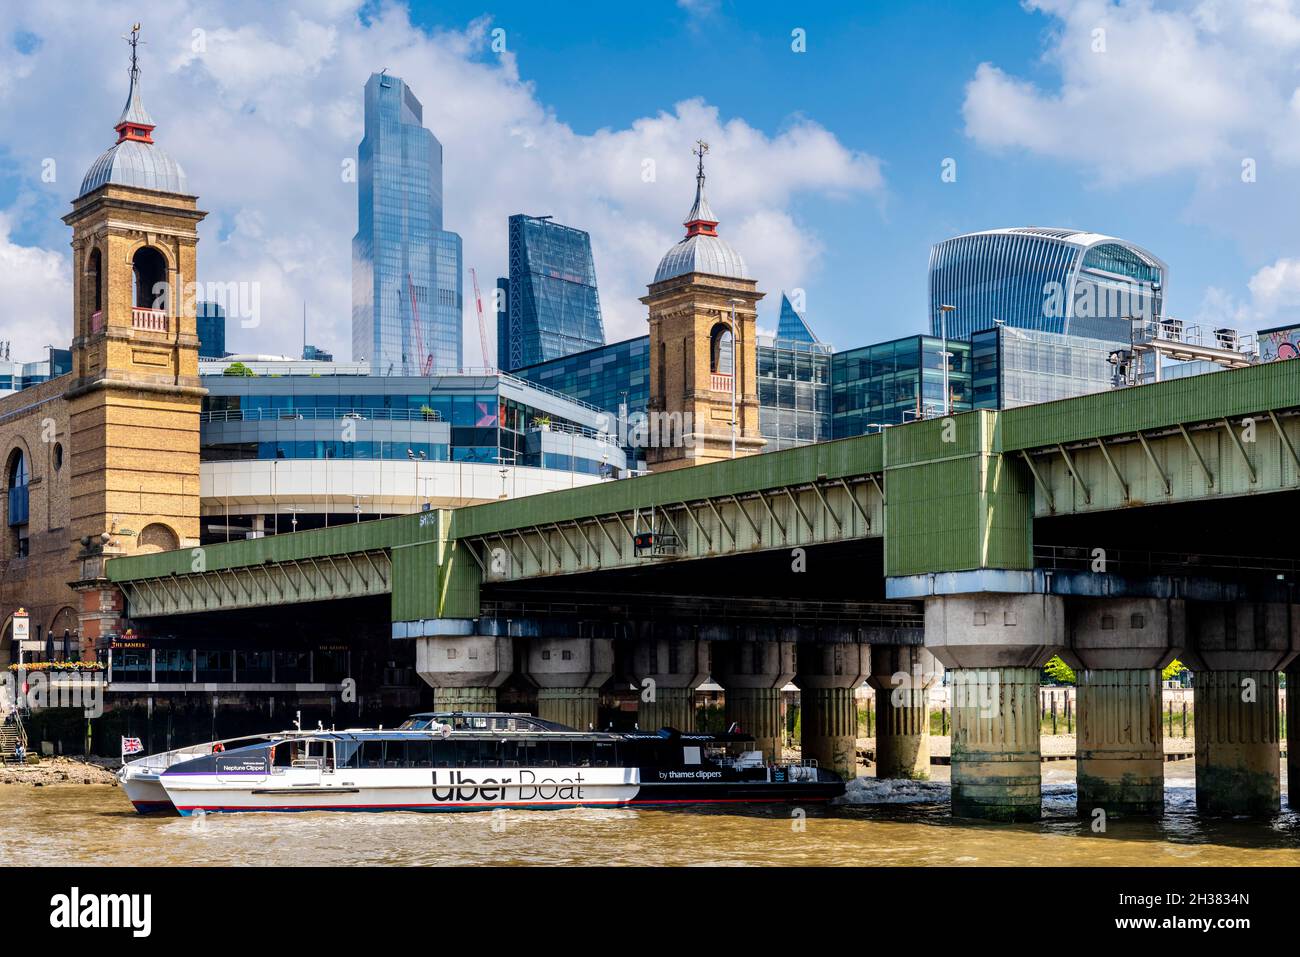 An Uber Boat Sails Under Cannon Street Railway Bridge With Cannon Street Station and The City Of London Skyscrapers In The Backround, London, England. Stock Photo